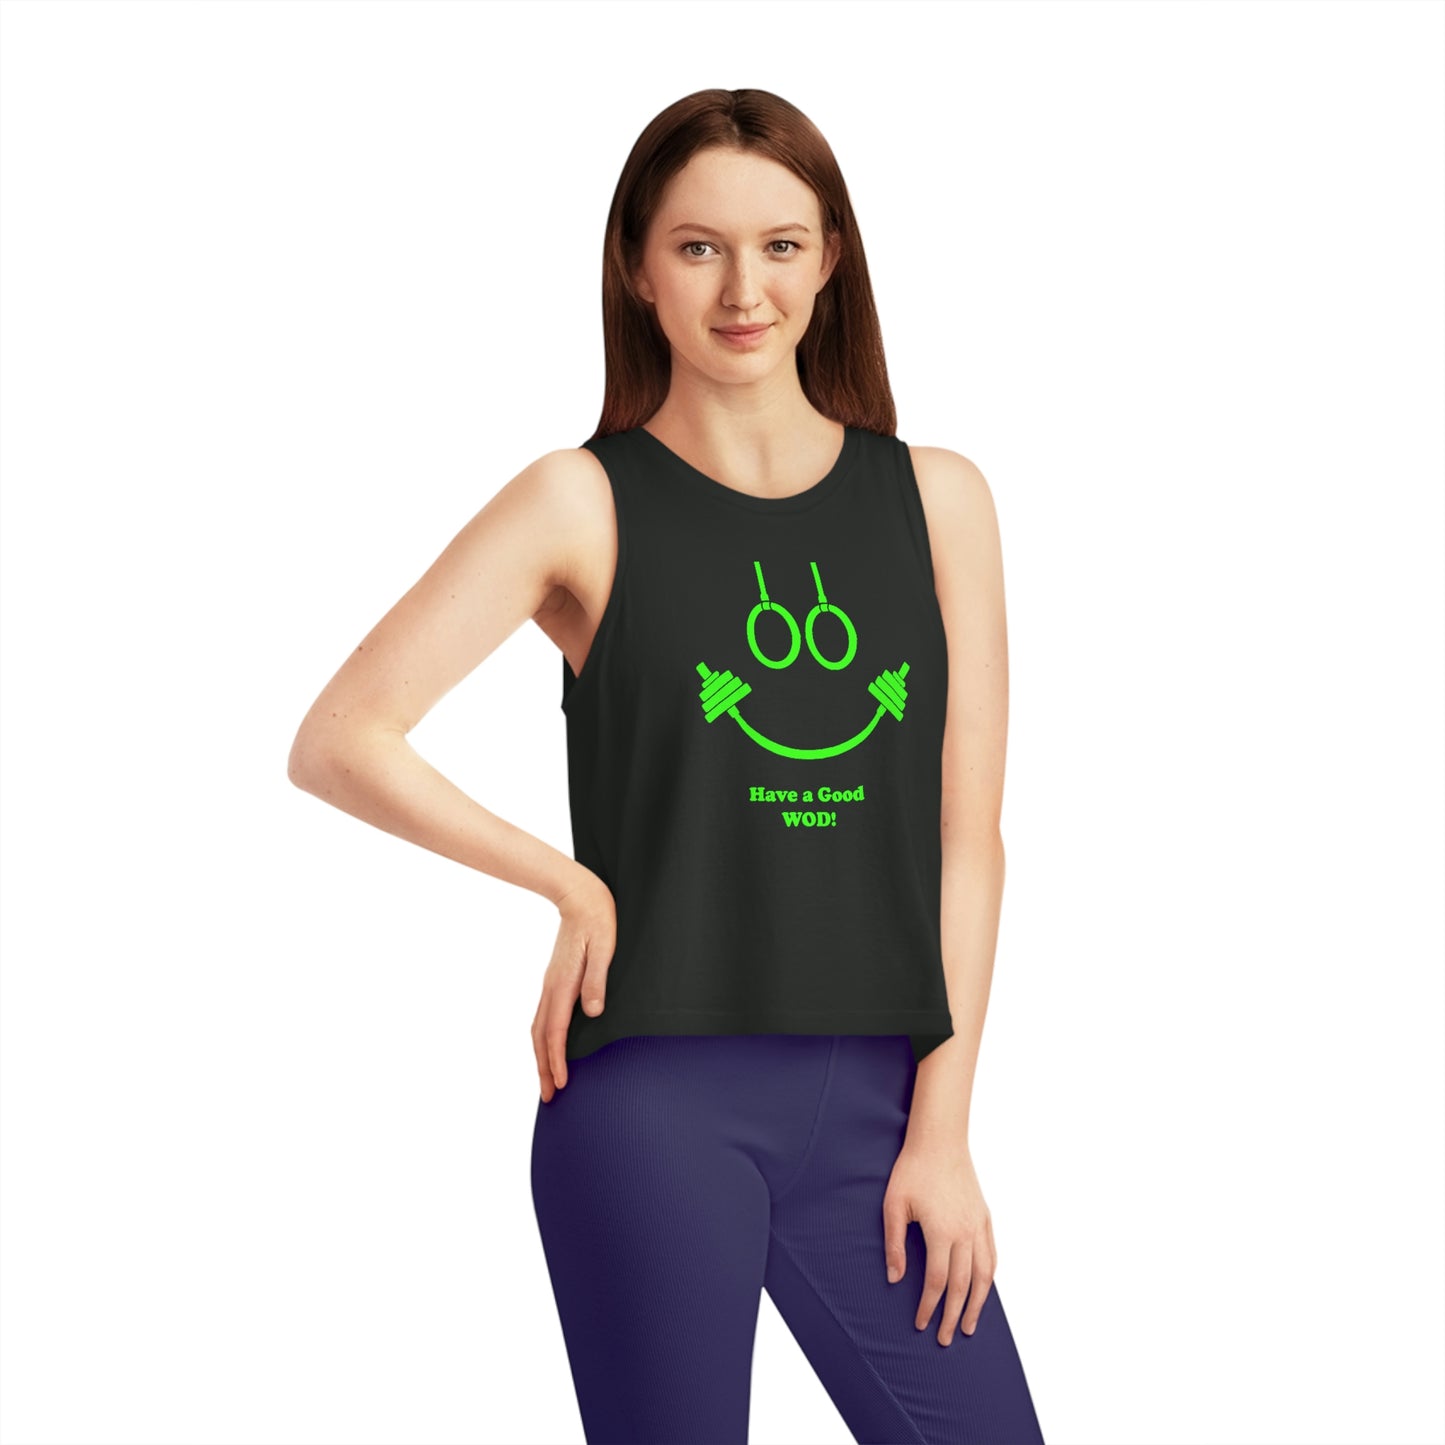 Have a good Wod! Cropped Tank Top